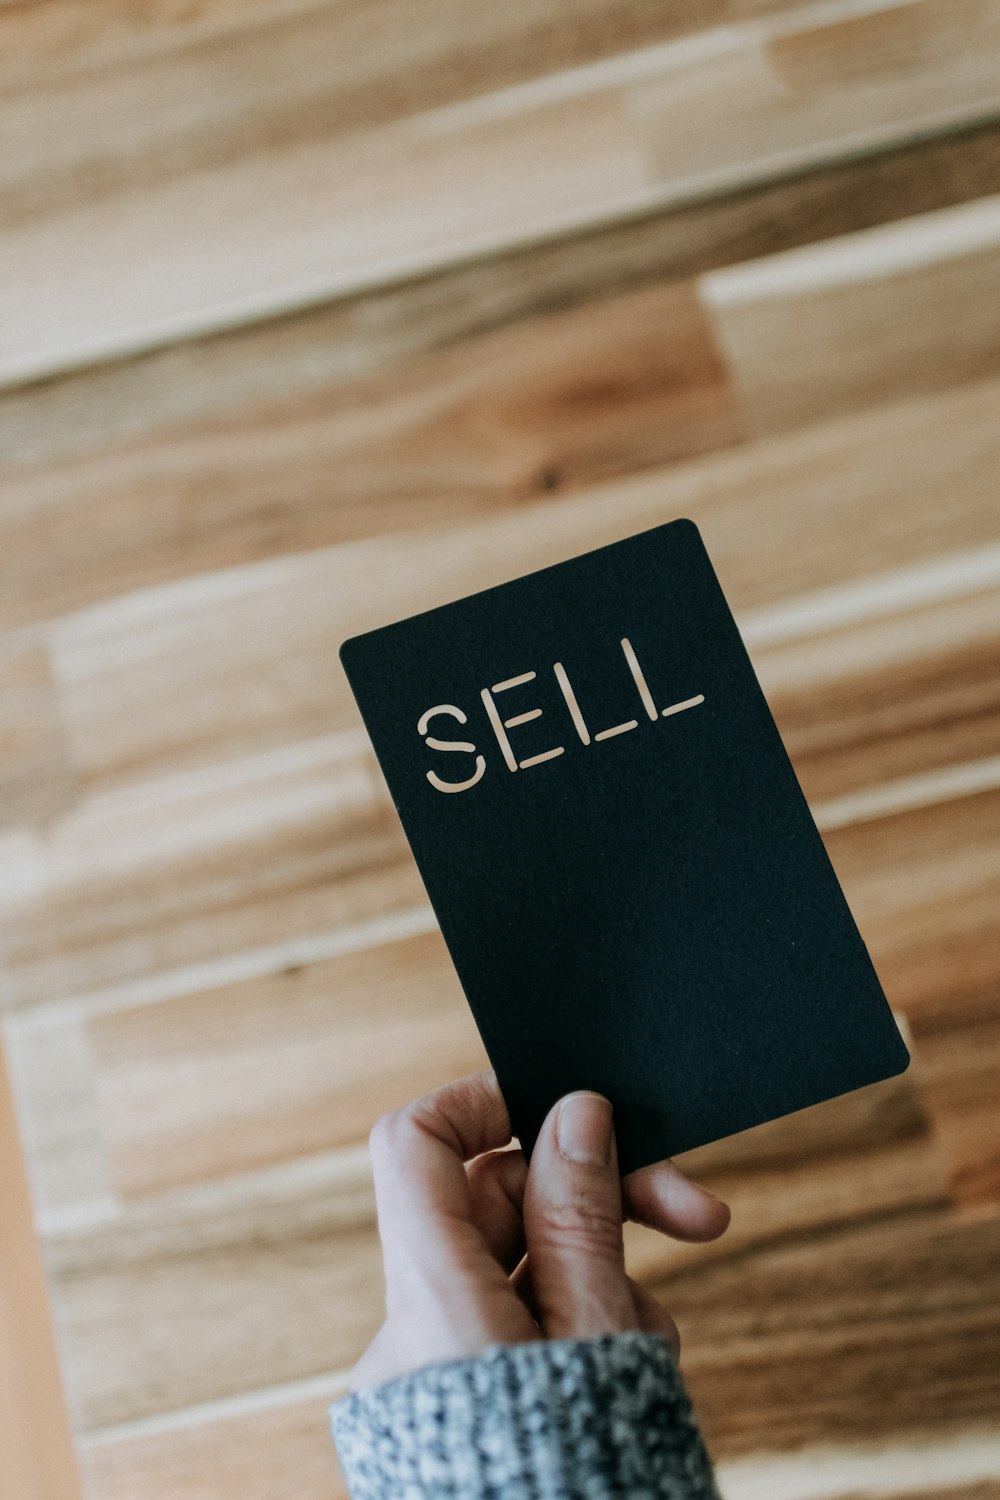 a person holding a black book with the word sell written on it